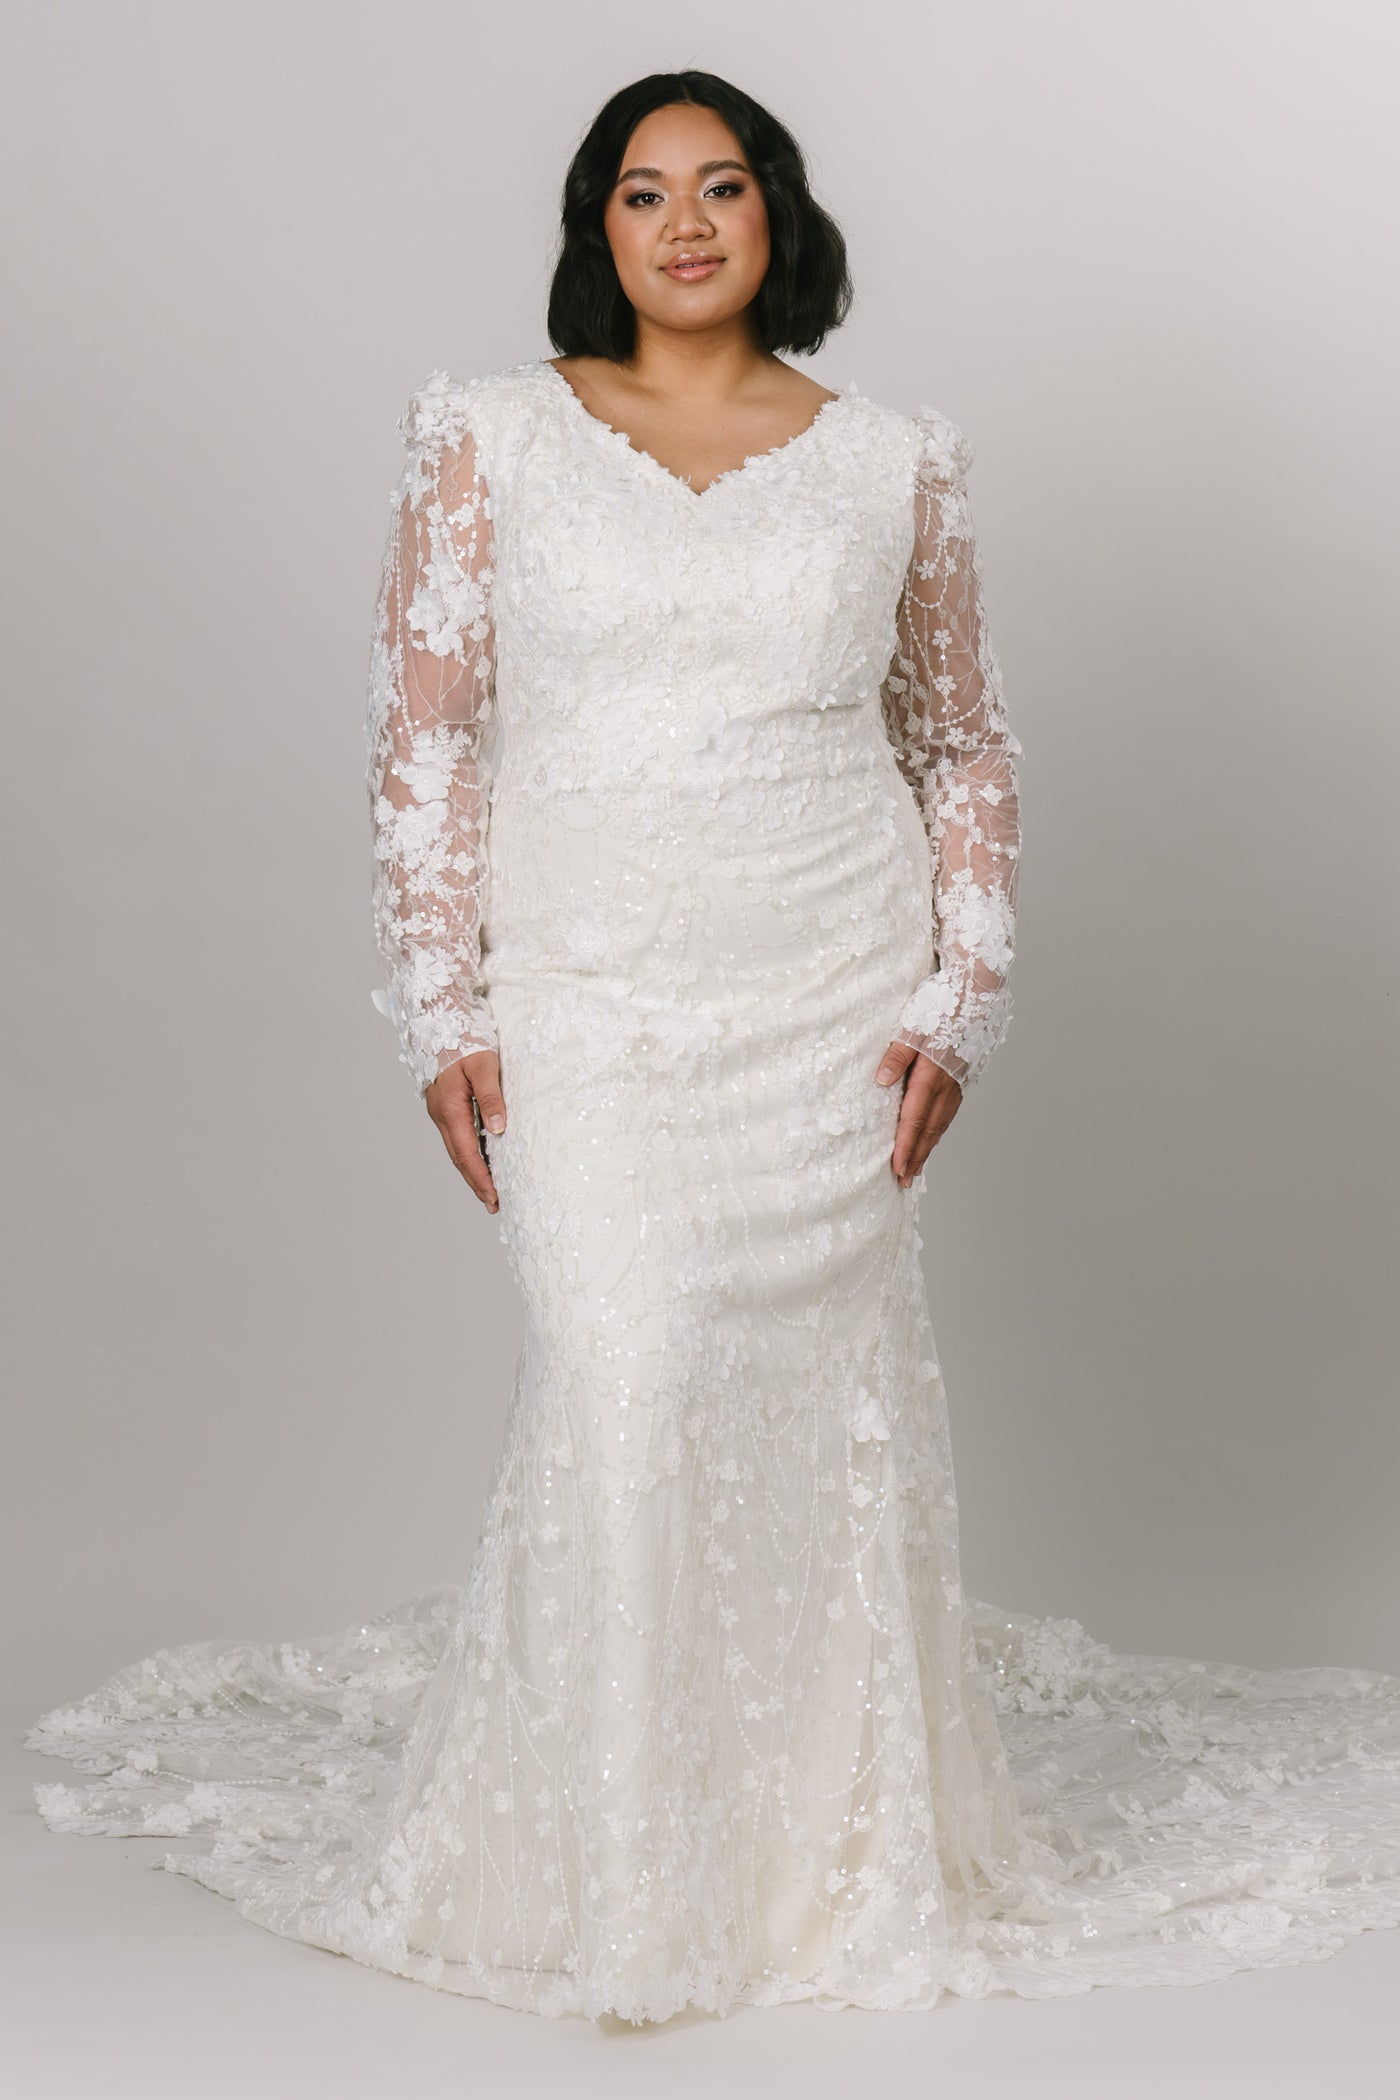 Beautiful lace modest wedding dress by Moments Made Bridal. It has a v-neckline with a long lace sleeves. The sleeves have a slight puff at the top of the sleeve. It is a fitted fit with a long gorgeous train. 